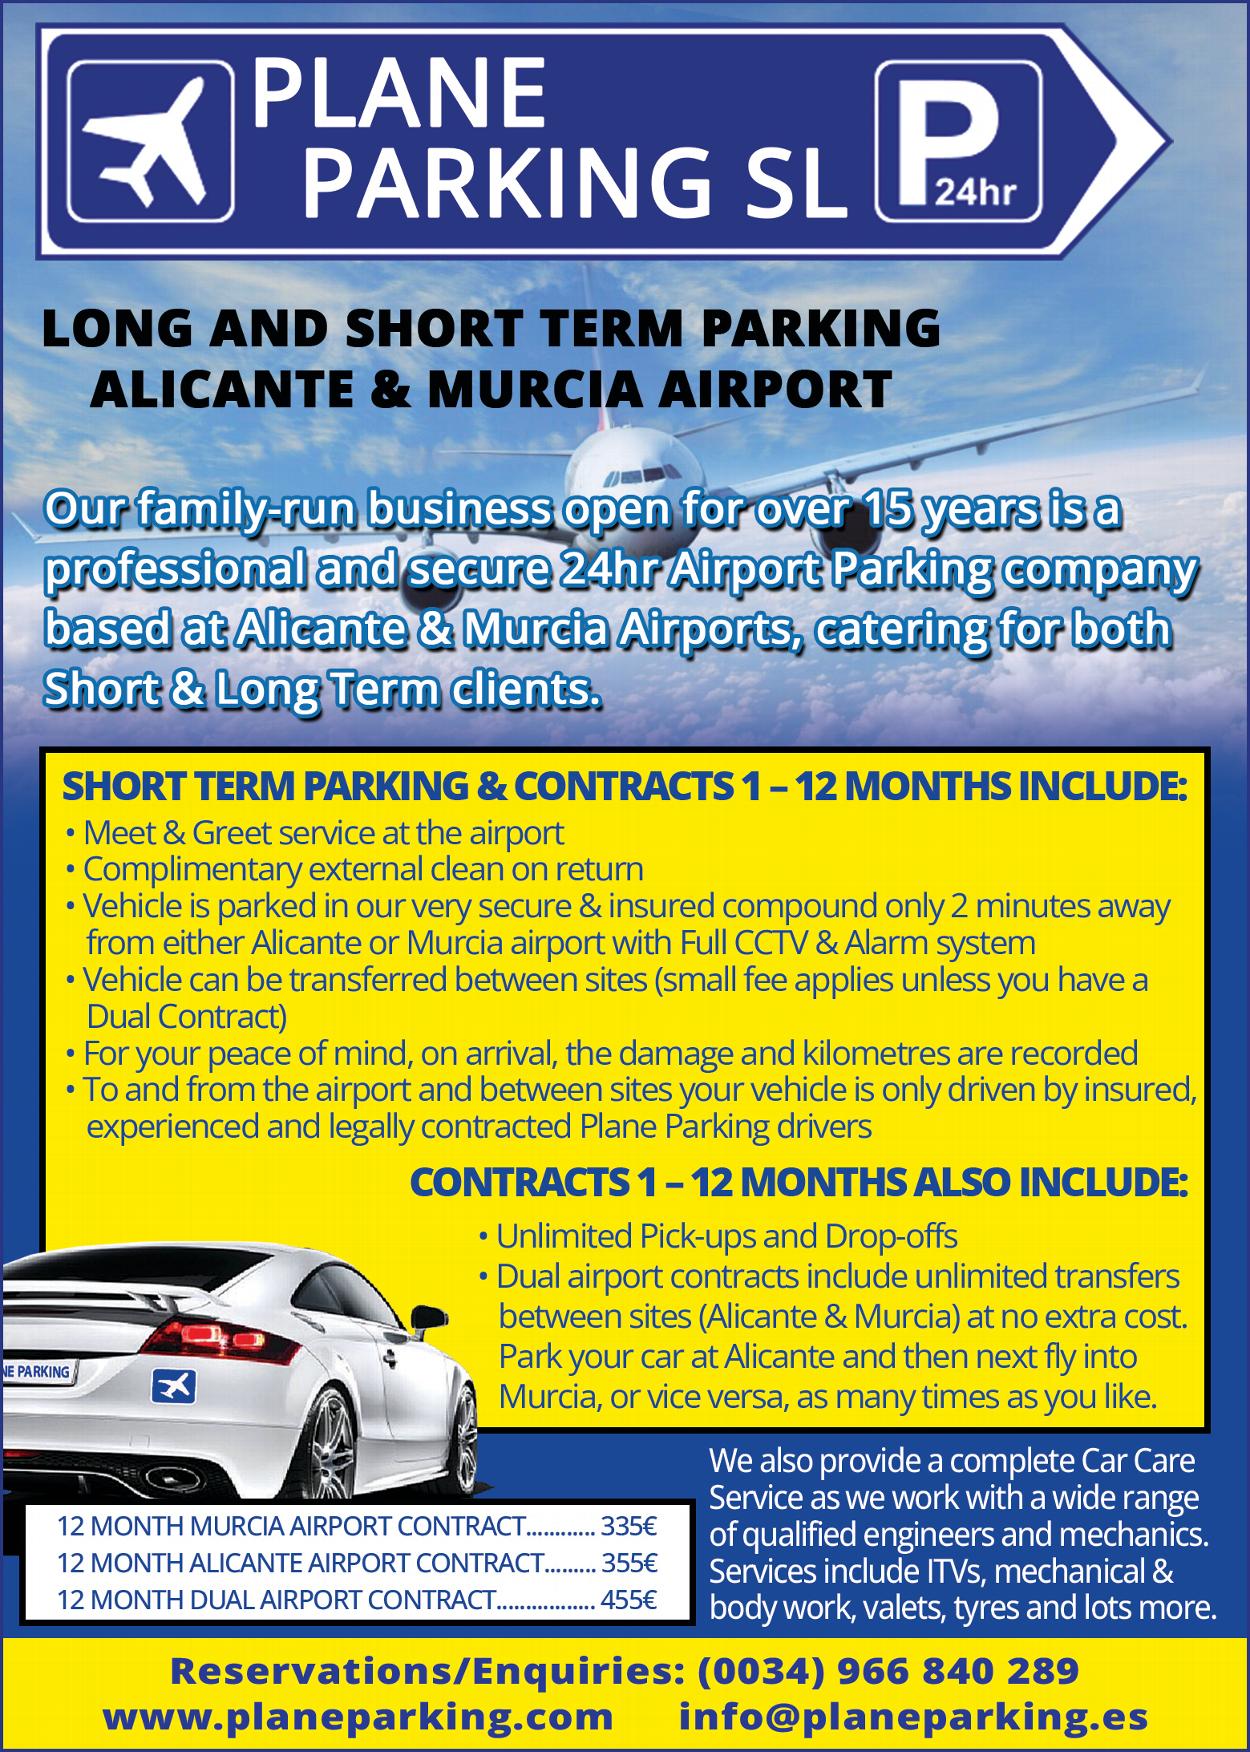 AIRPORT PARKING AT MURCIA & ALICANTE AIRPORTS 